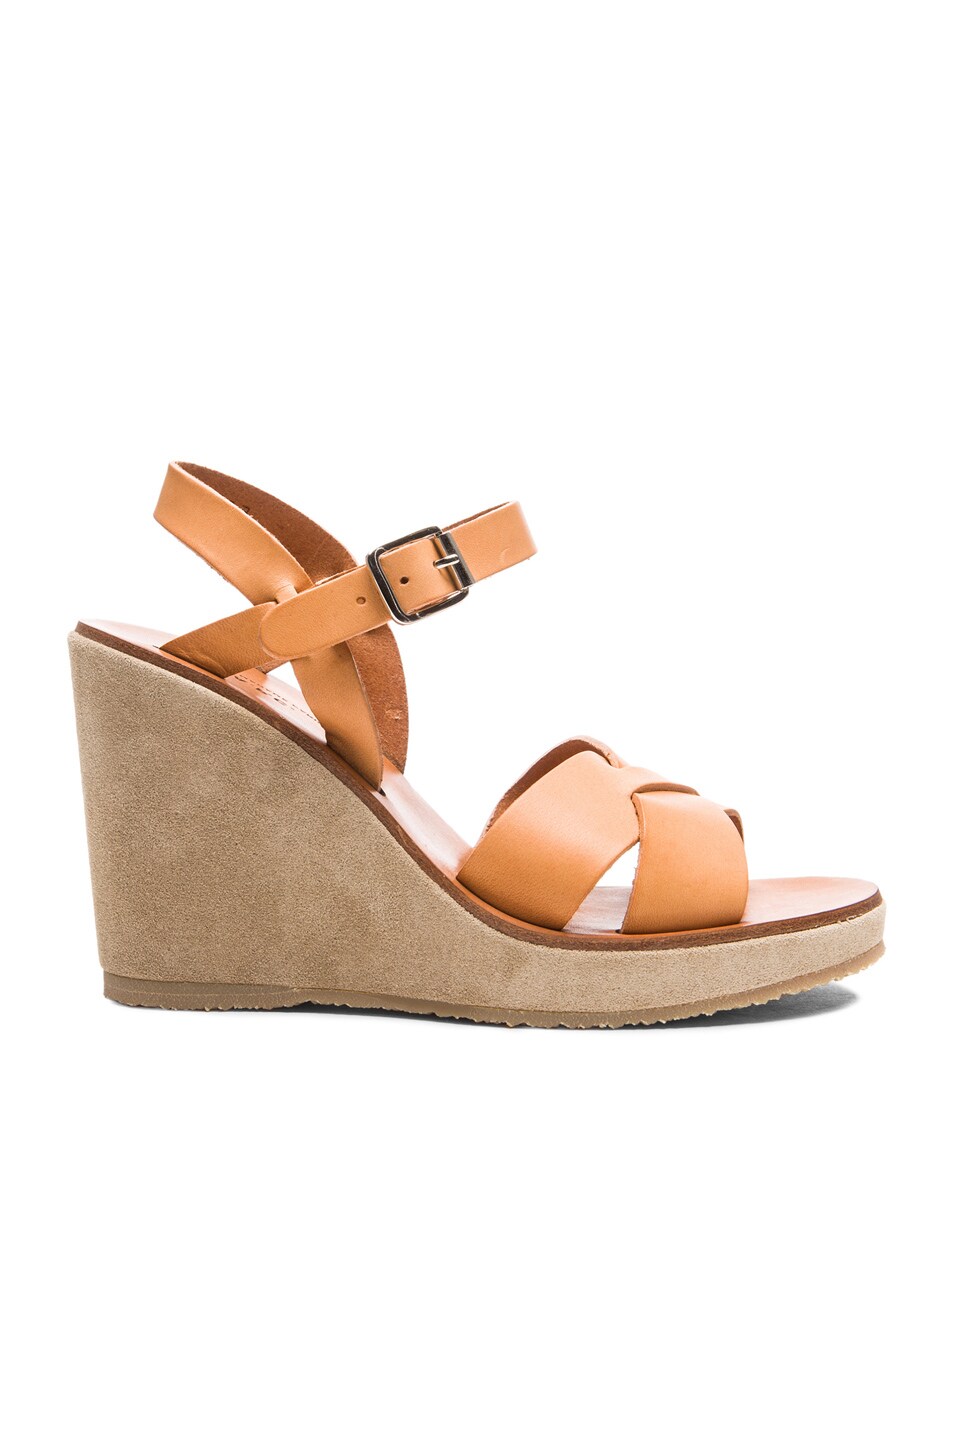 Image 1 of A.P.C. Juliette Leather Sandals in Beige Natural